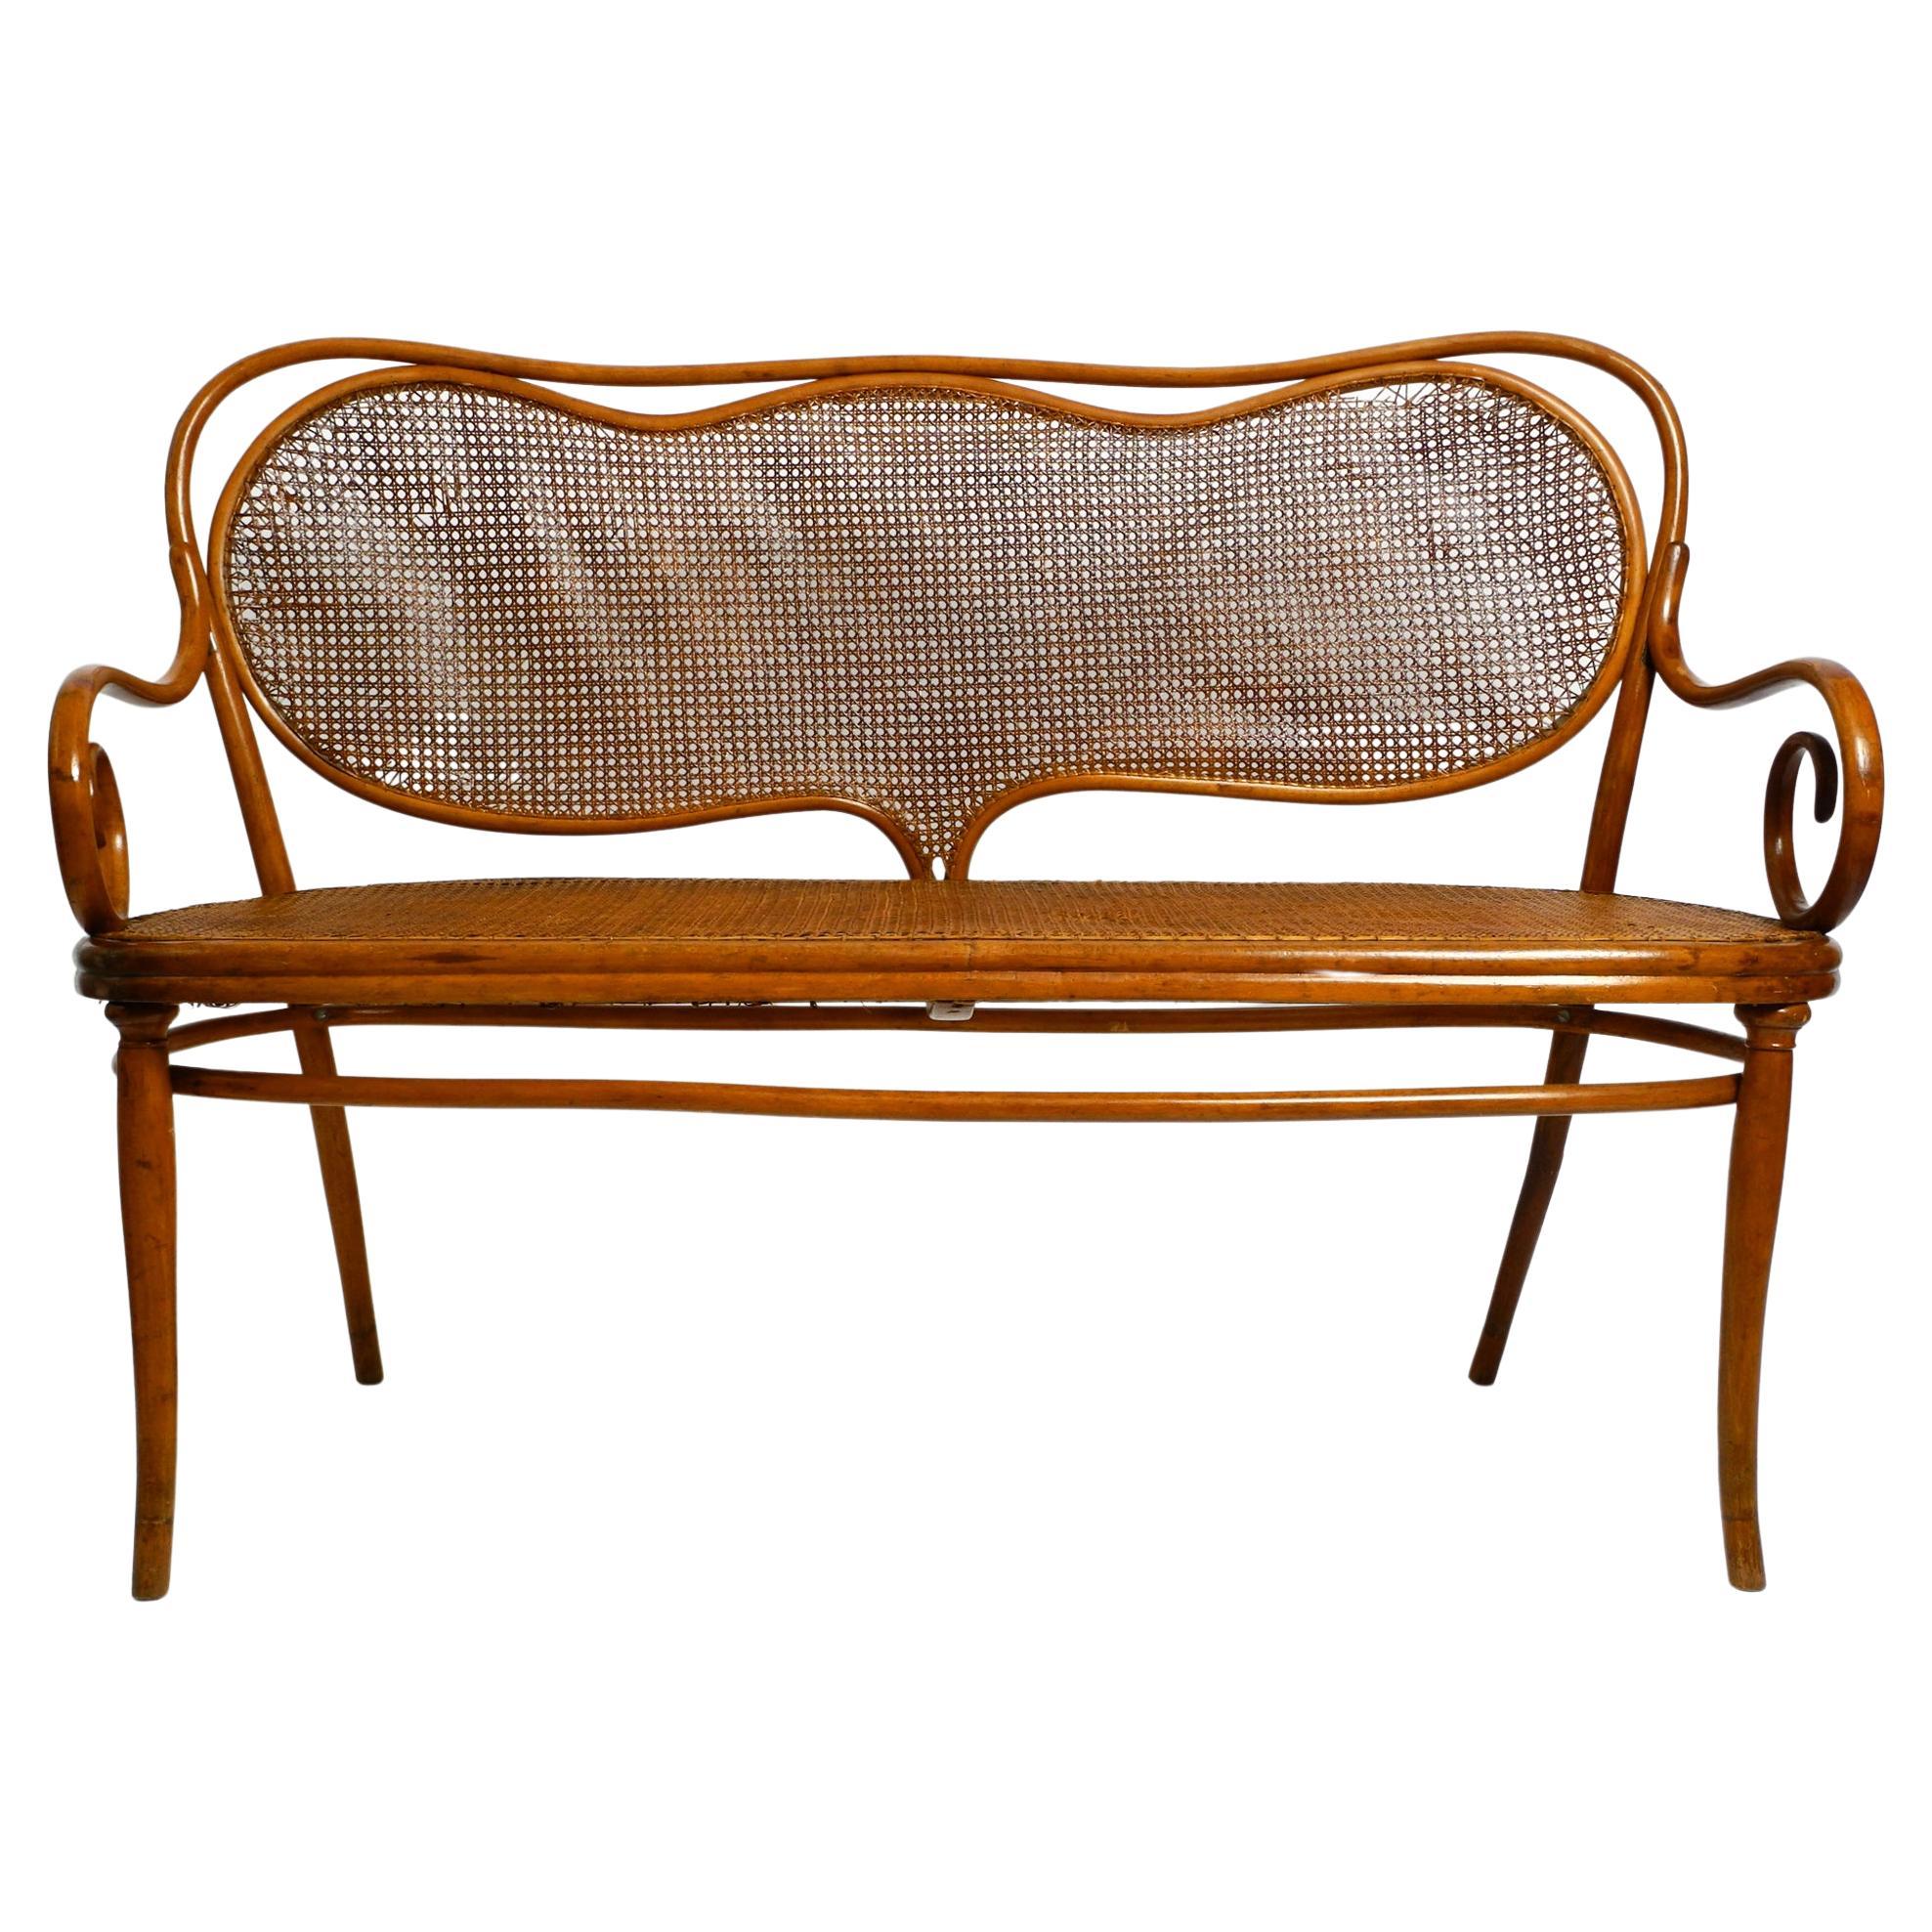 Bench No. 5 Thonet 1858 made of bent beech and wickerwork | restoration needed For Sale